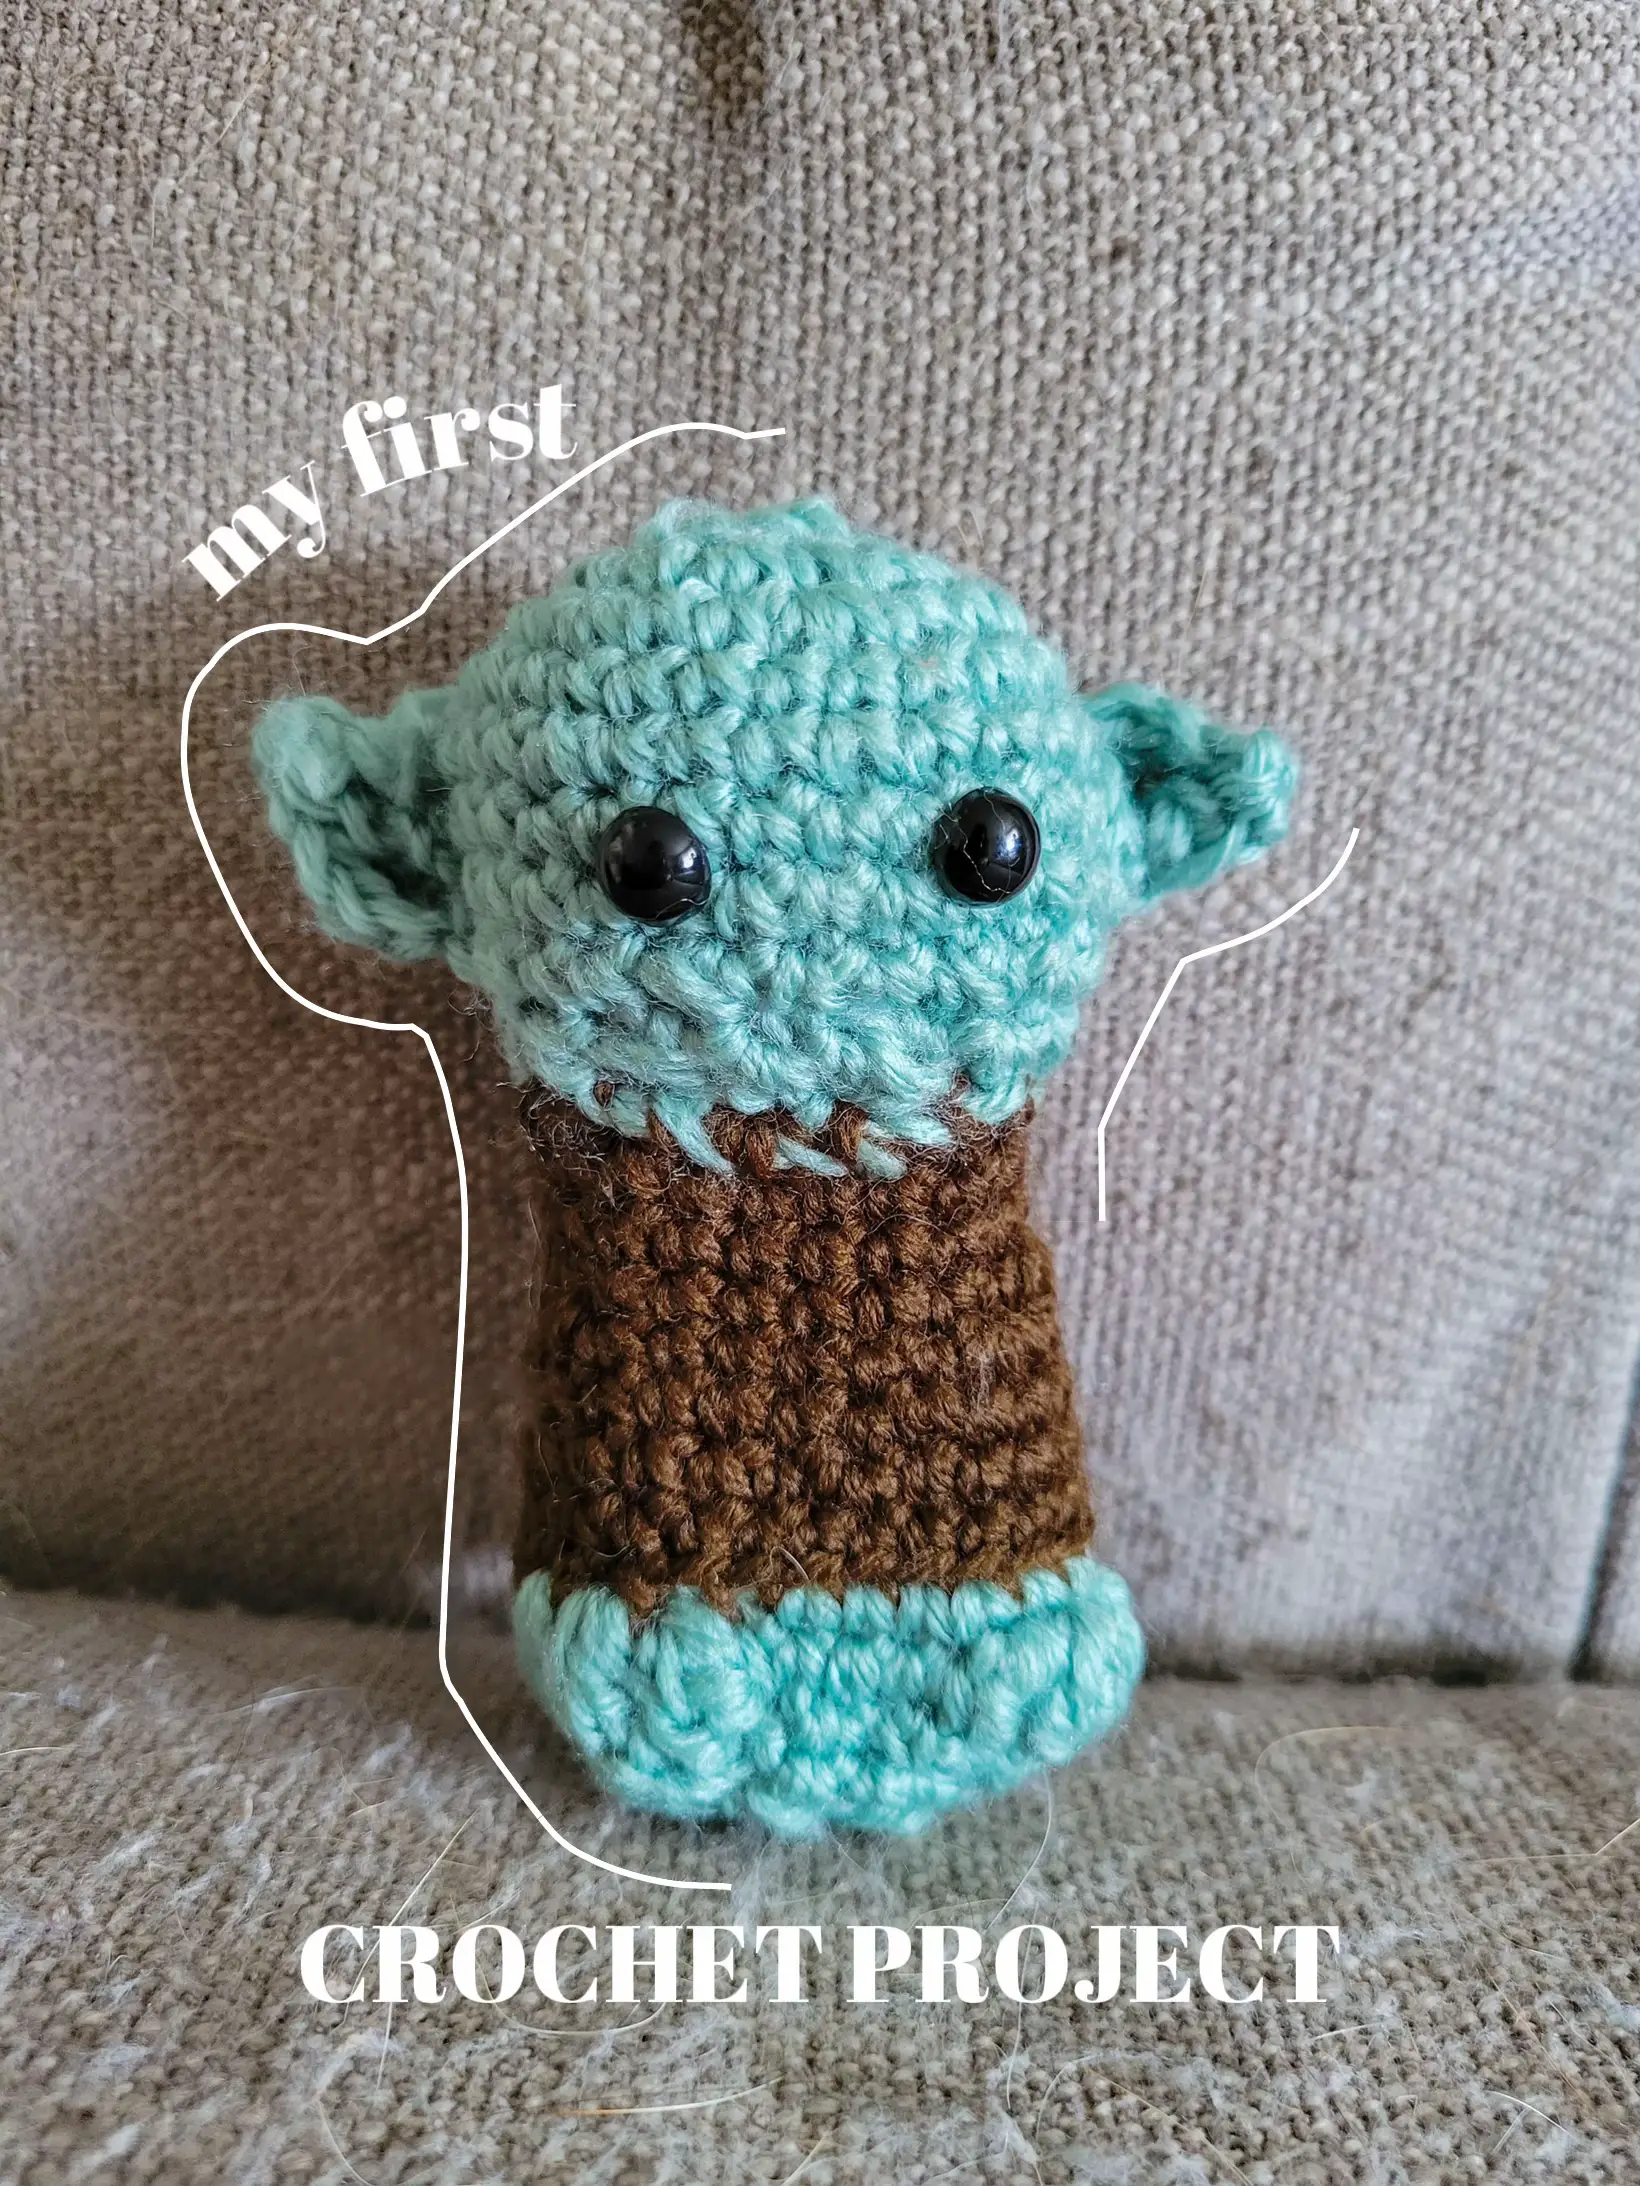 What's the largest crochet hook you've ever used? #yarn #crochet #amigurumi  